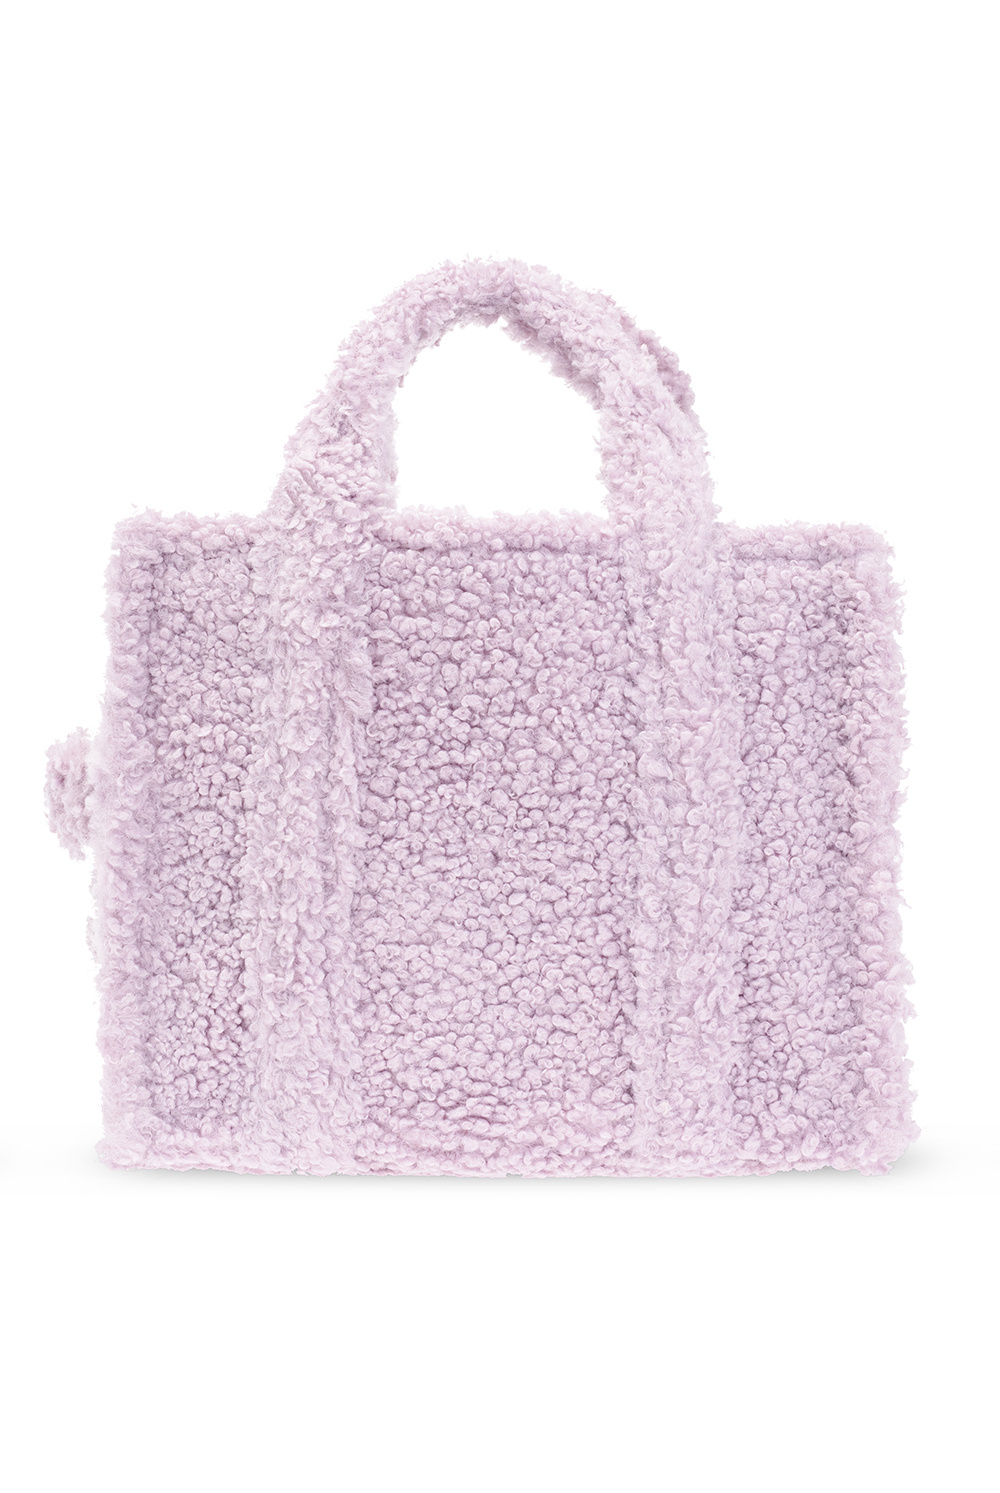 [Marc Jacobs] THE TEDDY SMALL TRAVELER TOTE BAG M0016740 FLUFFY PINK